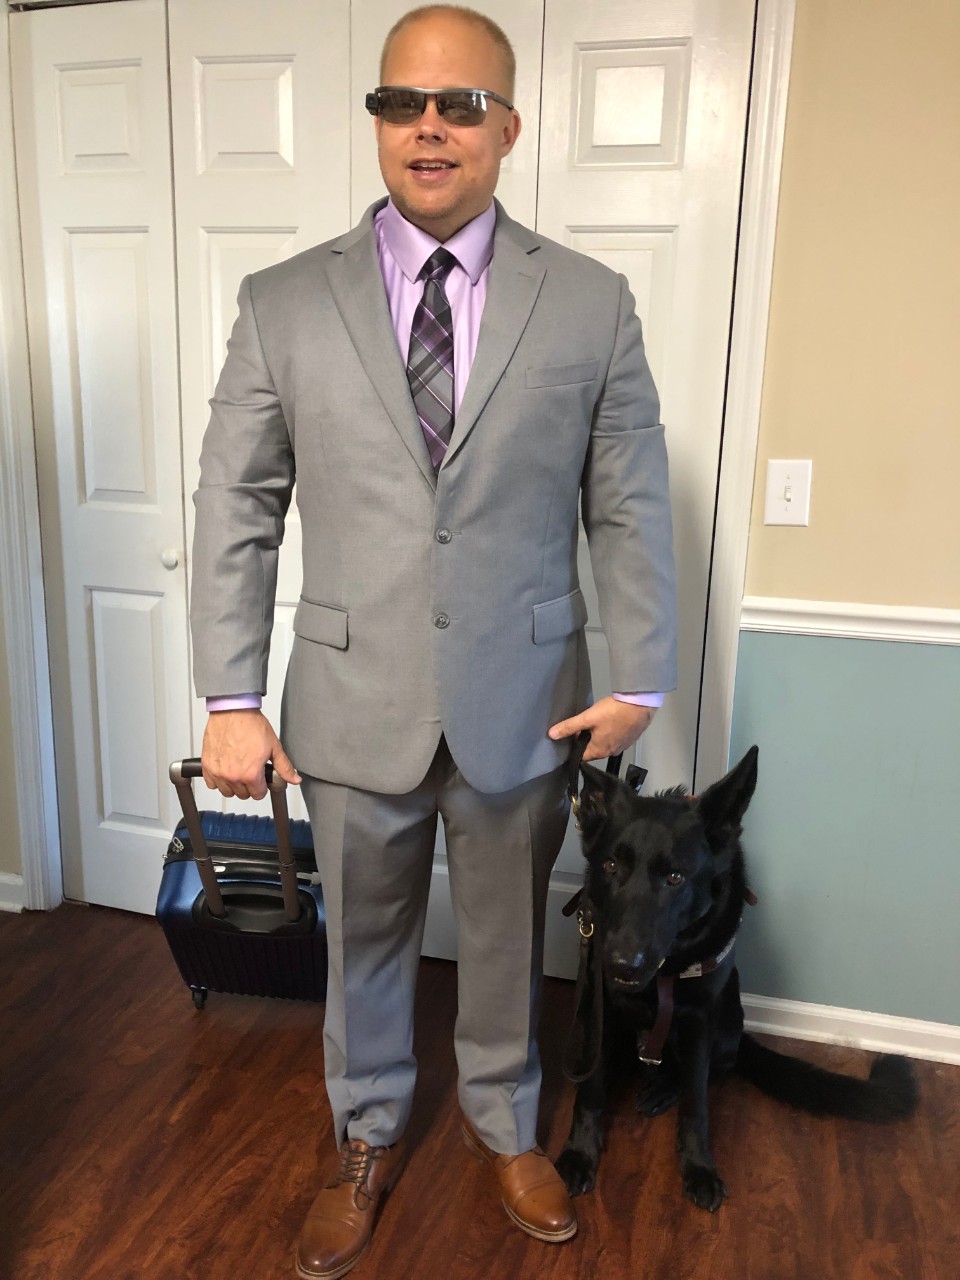 picture of article author James Brown standing in front of a closet door with his black assistant dog, Vantis. James is very professionally dressed in a gray business suit, and he is pulling a blue suitcase on wheels. His other hand holds his dog’s harness.